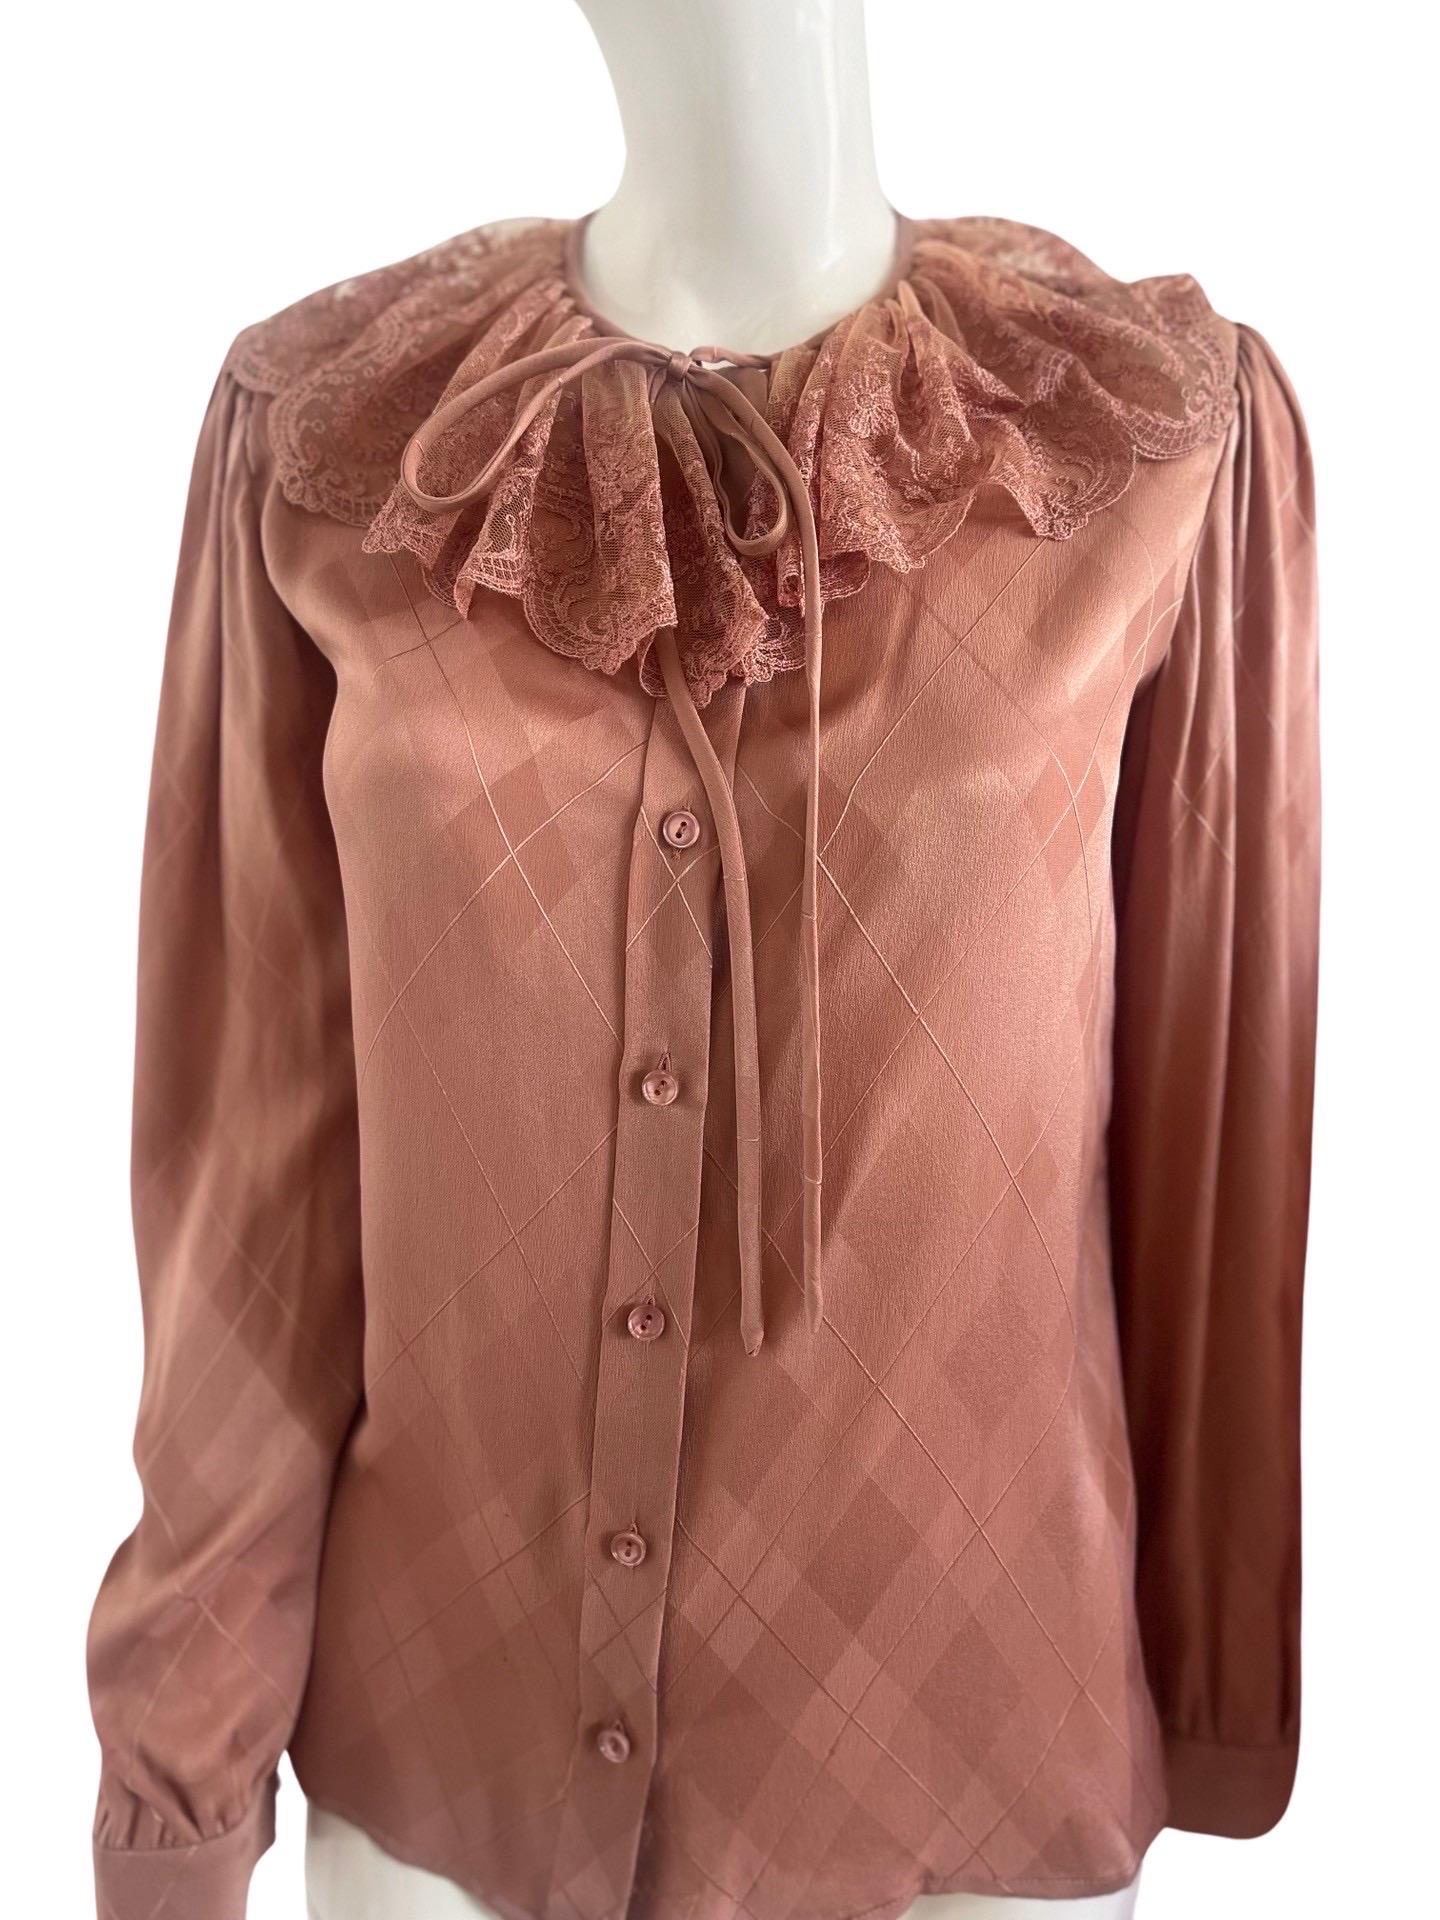 The most stunning 1980s Valentino blouse in a beautiful blush rose color pink silk in an Argyll print and a lace Peter Pan collar. Matching blush buttons and a tie in the front. Small shoulder pads easy to remove. Excellent condition, this looks to